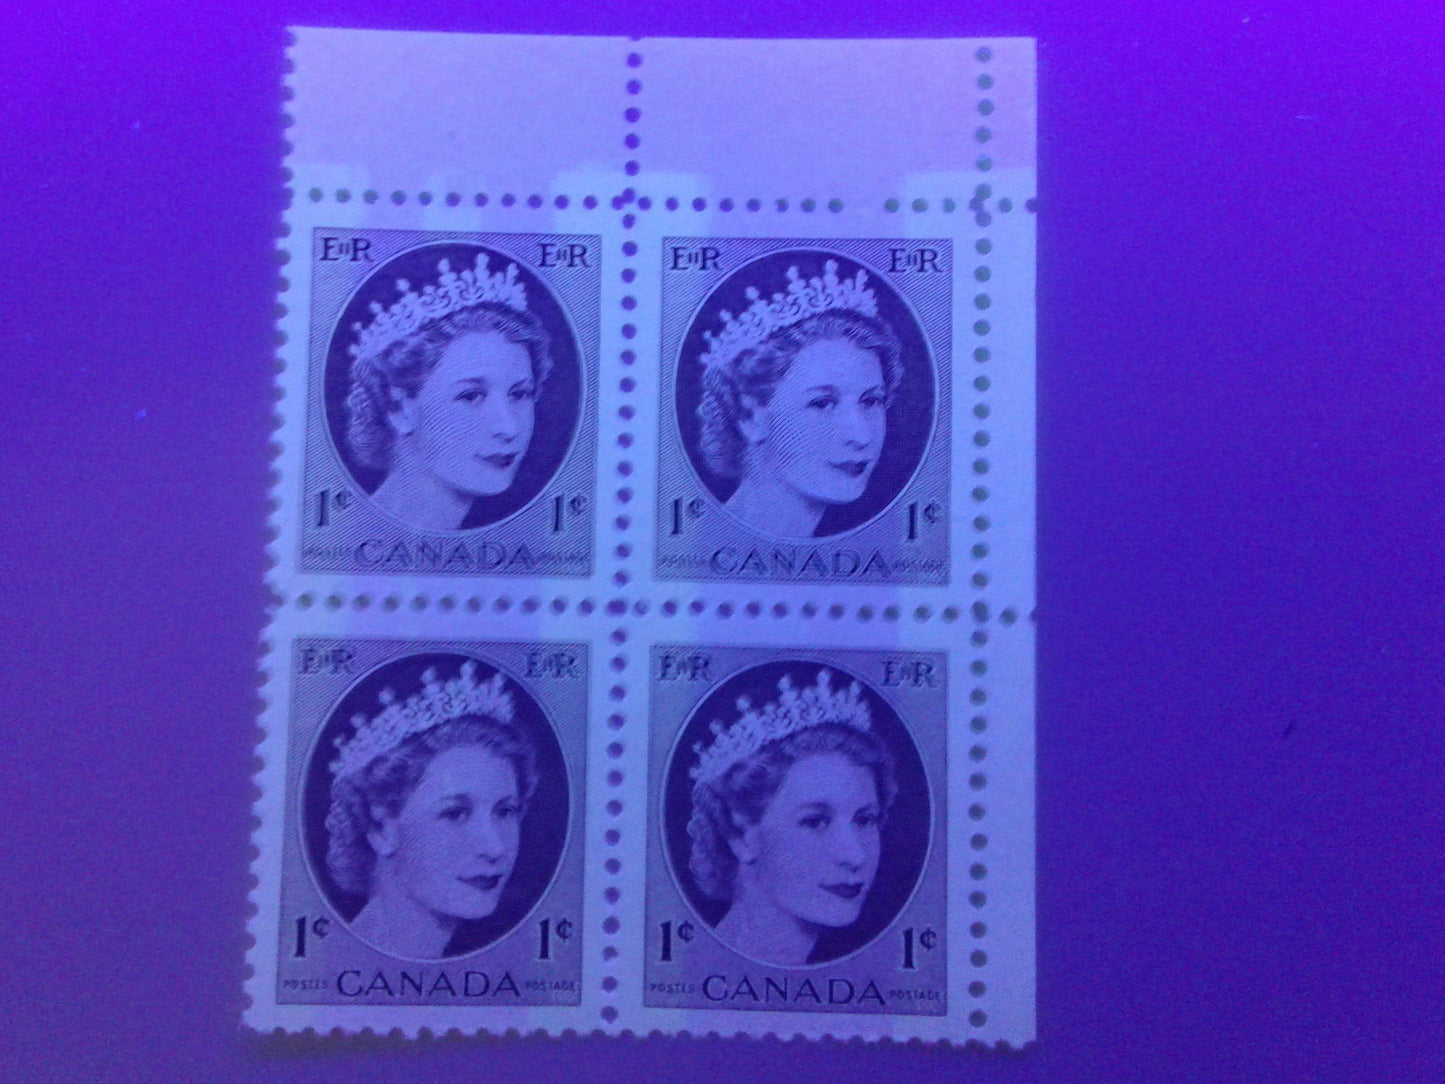 Canada #337p(var) 1c Chocolate Queen Elizabeth II, 1954-1962 Wilding Issue, Upper Right Blank Winnipeg Tagged Block of 4, Perf. 12 x 11.9, DF Gw Vertically Ribbed Paper, Smooth Semi-Gloss Gum, Bluish White Tagging With Extra Streak, VFNH Brixton Chrome 